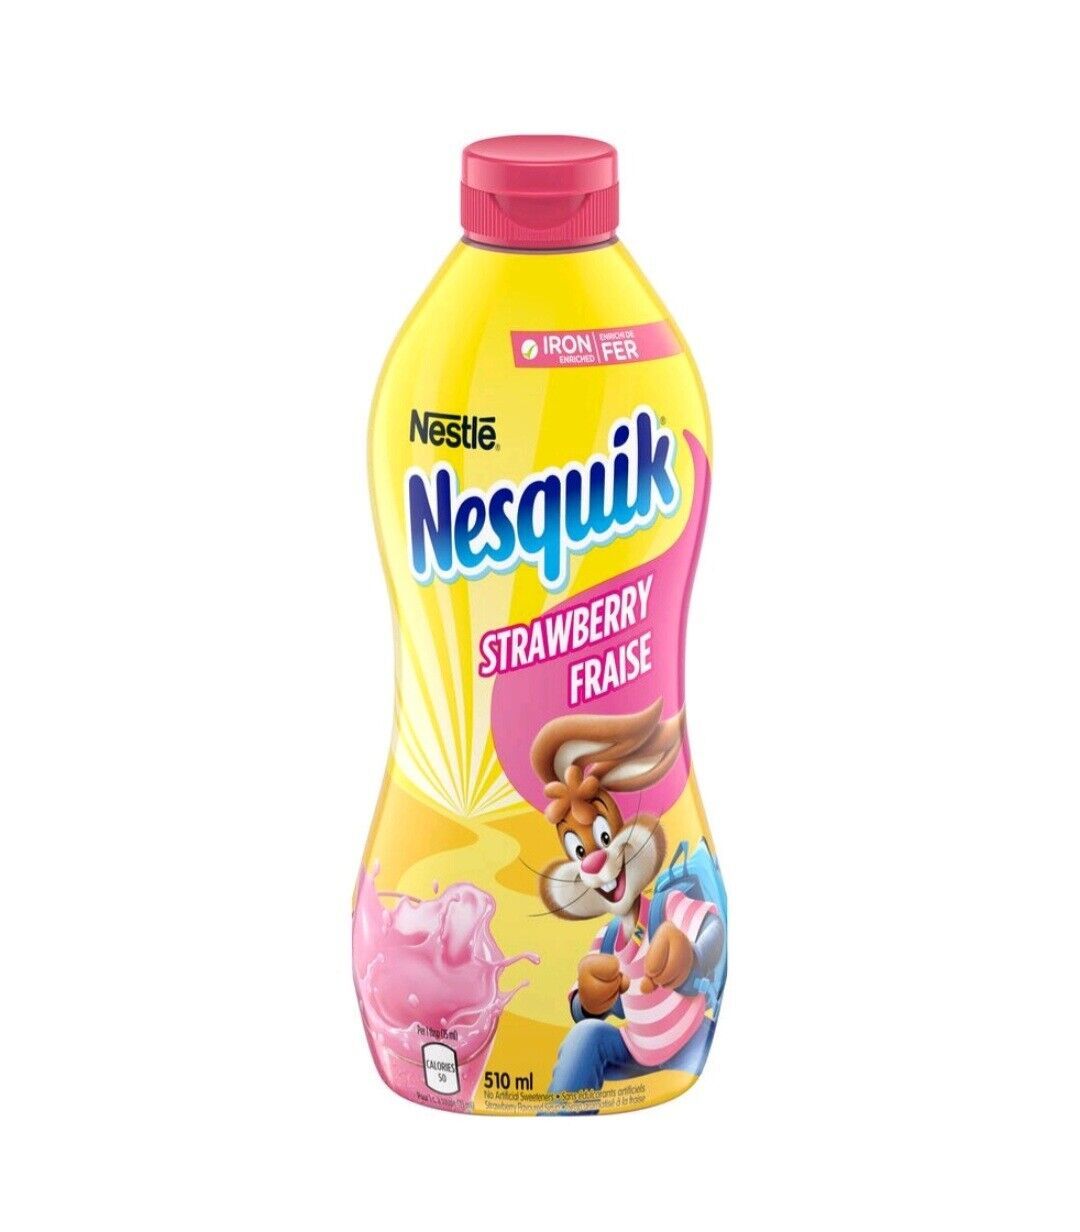 Nestle NESQUIK Strawberry Syrup 510 ml each from Canada Free Ship - $23.22